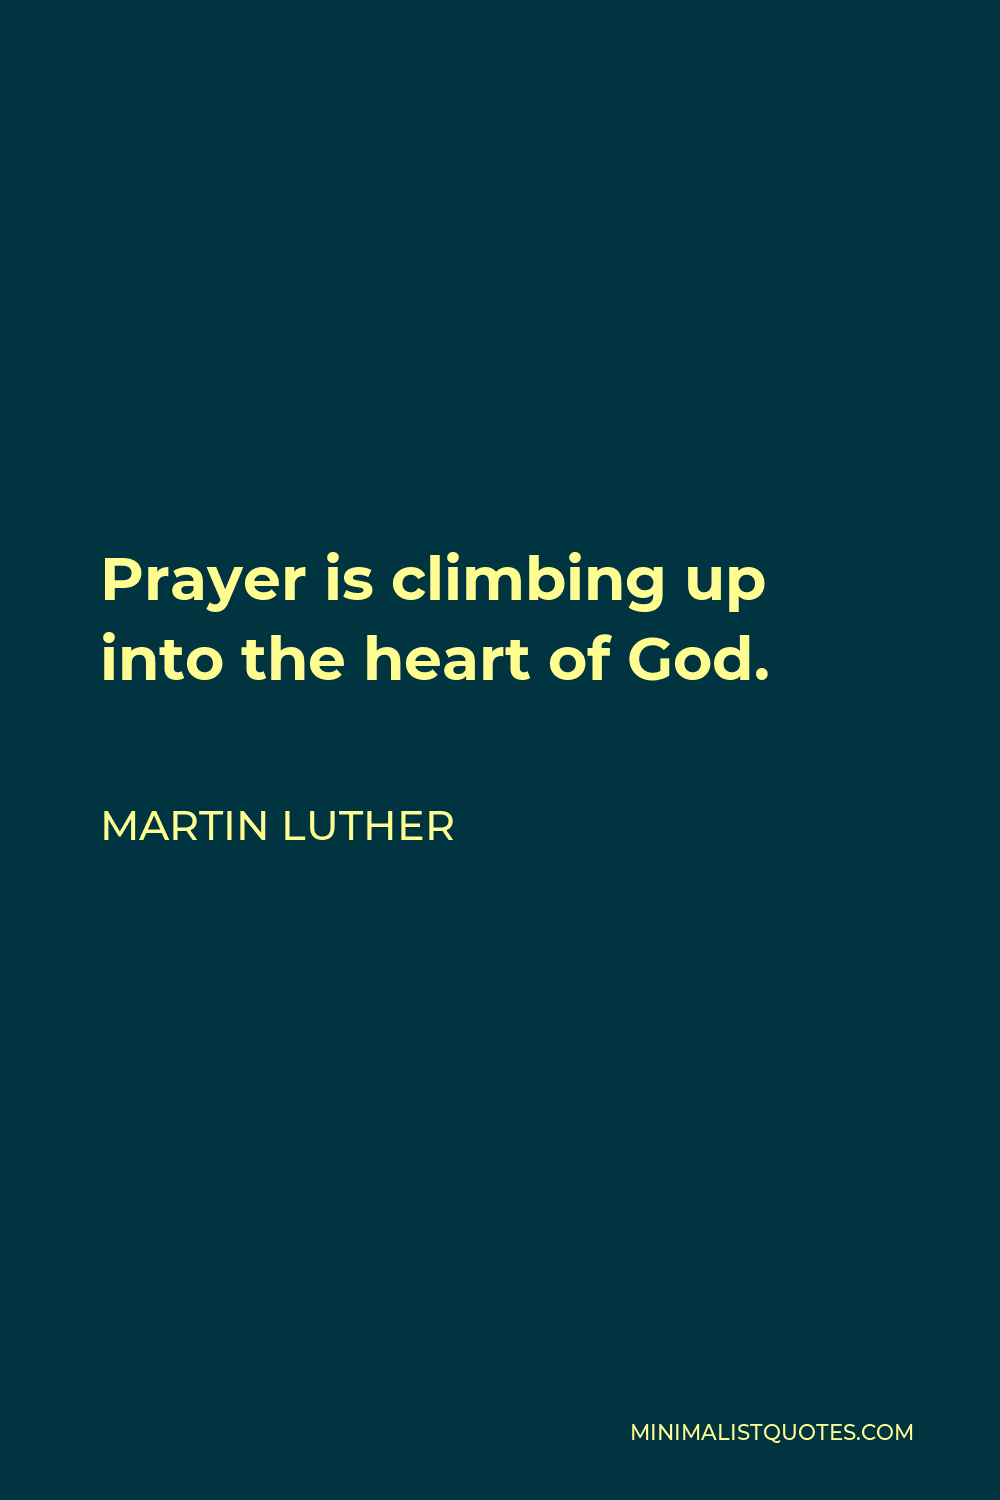 Martin Luther Quote - Prayer is climbing up into the heart of God.